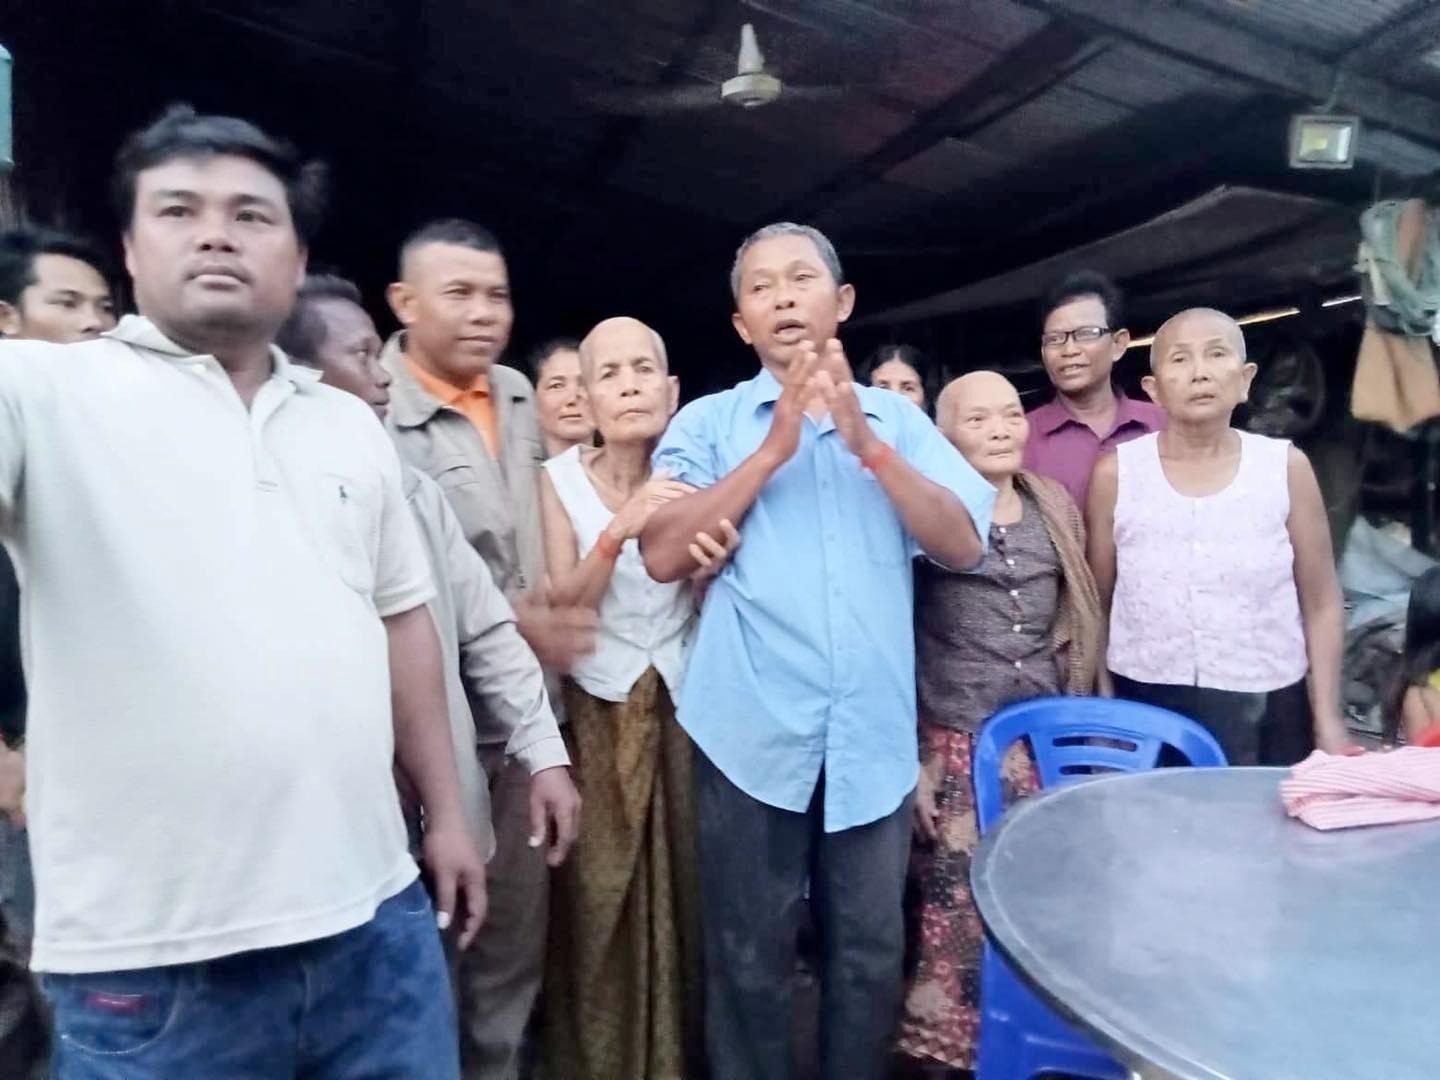 Nhim Sarom, the commune chief-elect for Kampong Thom’s Chamna Loeu commune, greets supporters after his Wednesday release from police custody. The day prior, police had arrested him for an alleged robbery case for which he had been convicted in 2014. Photo from the Facebook page of Sun Chanthy, posted Wednesday, June 22, 2022.